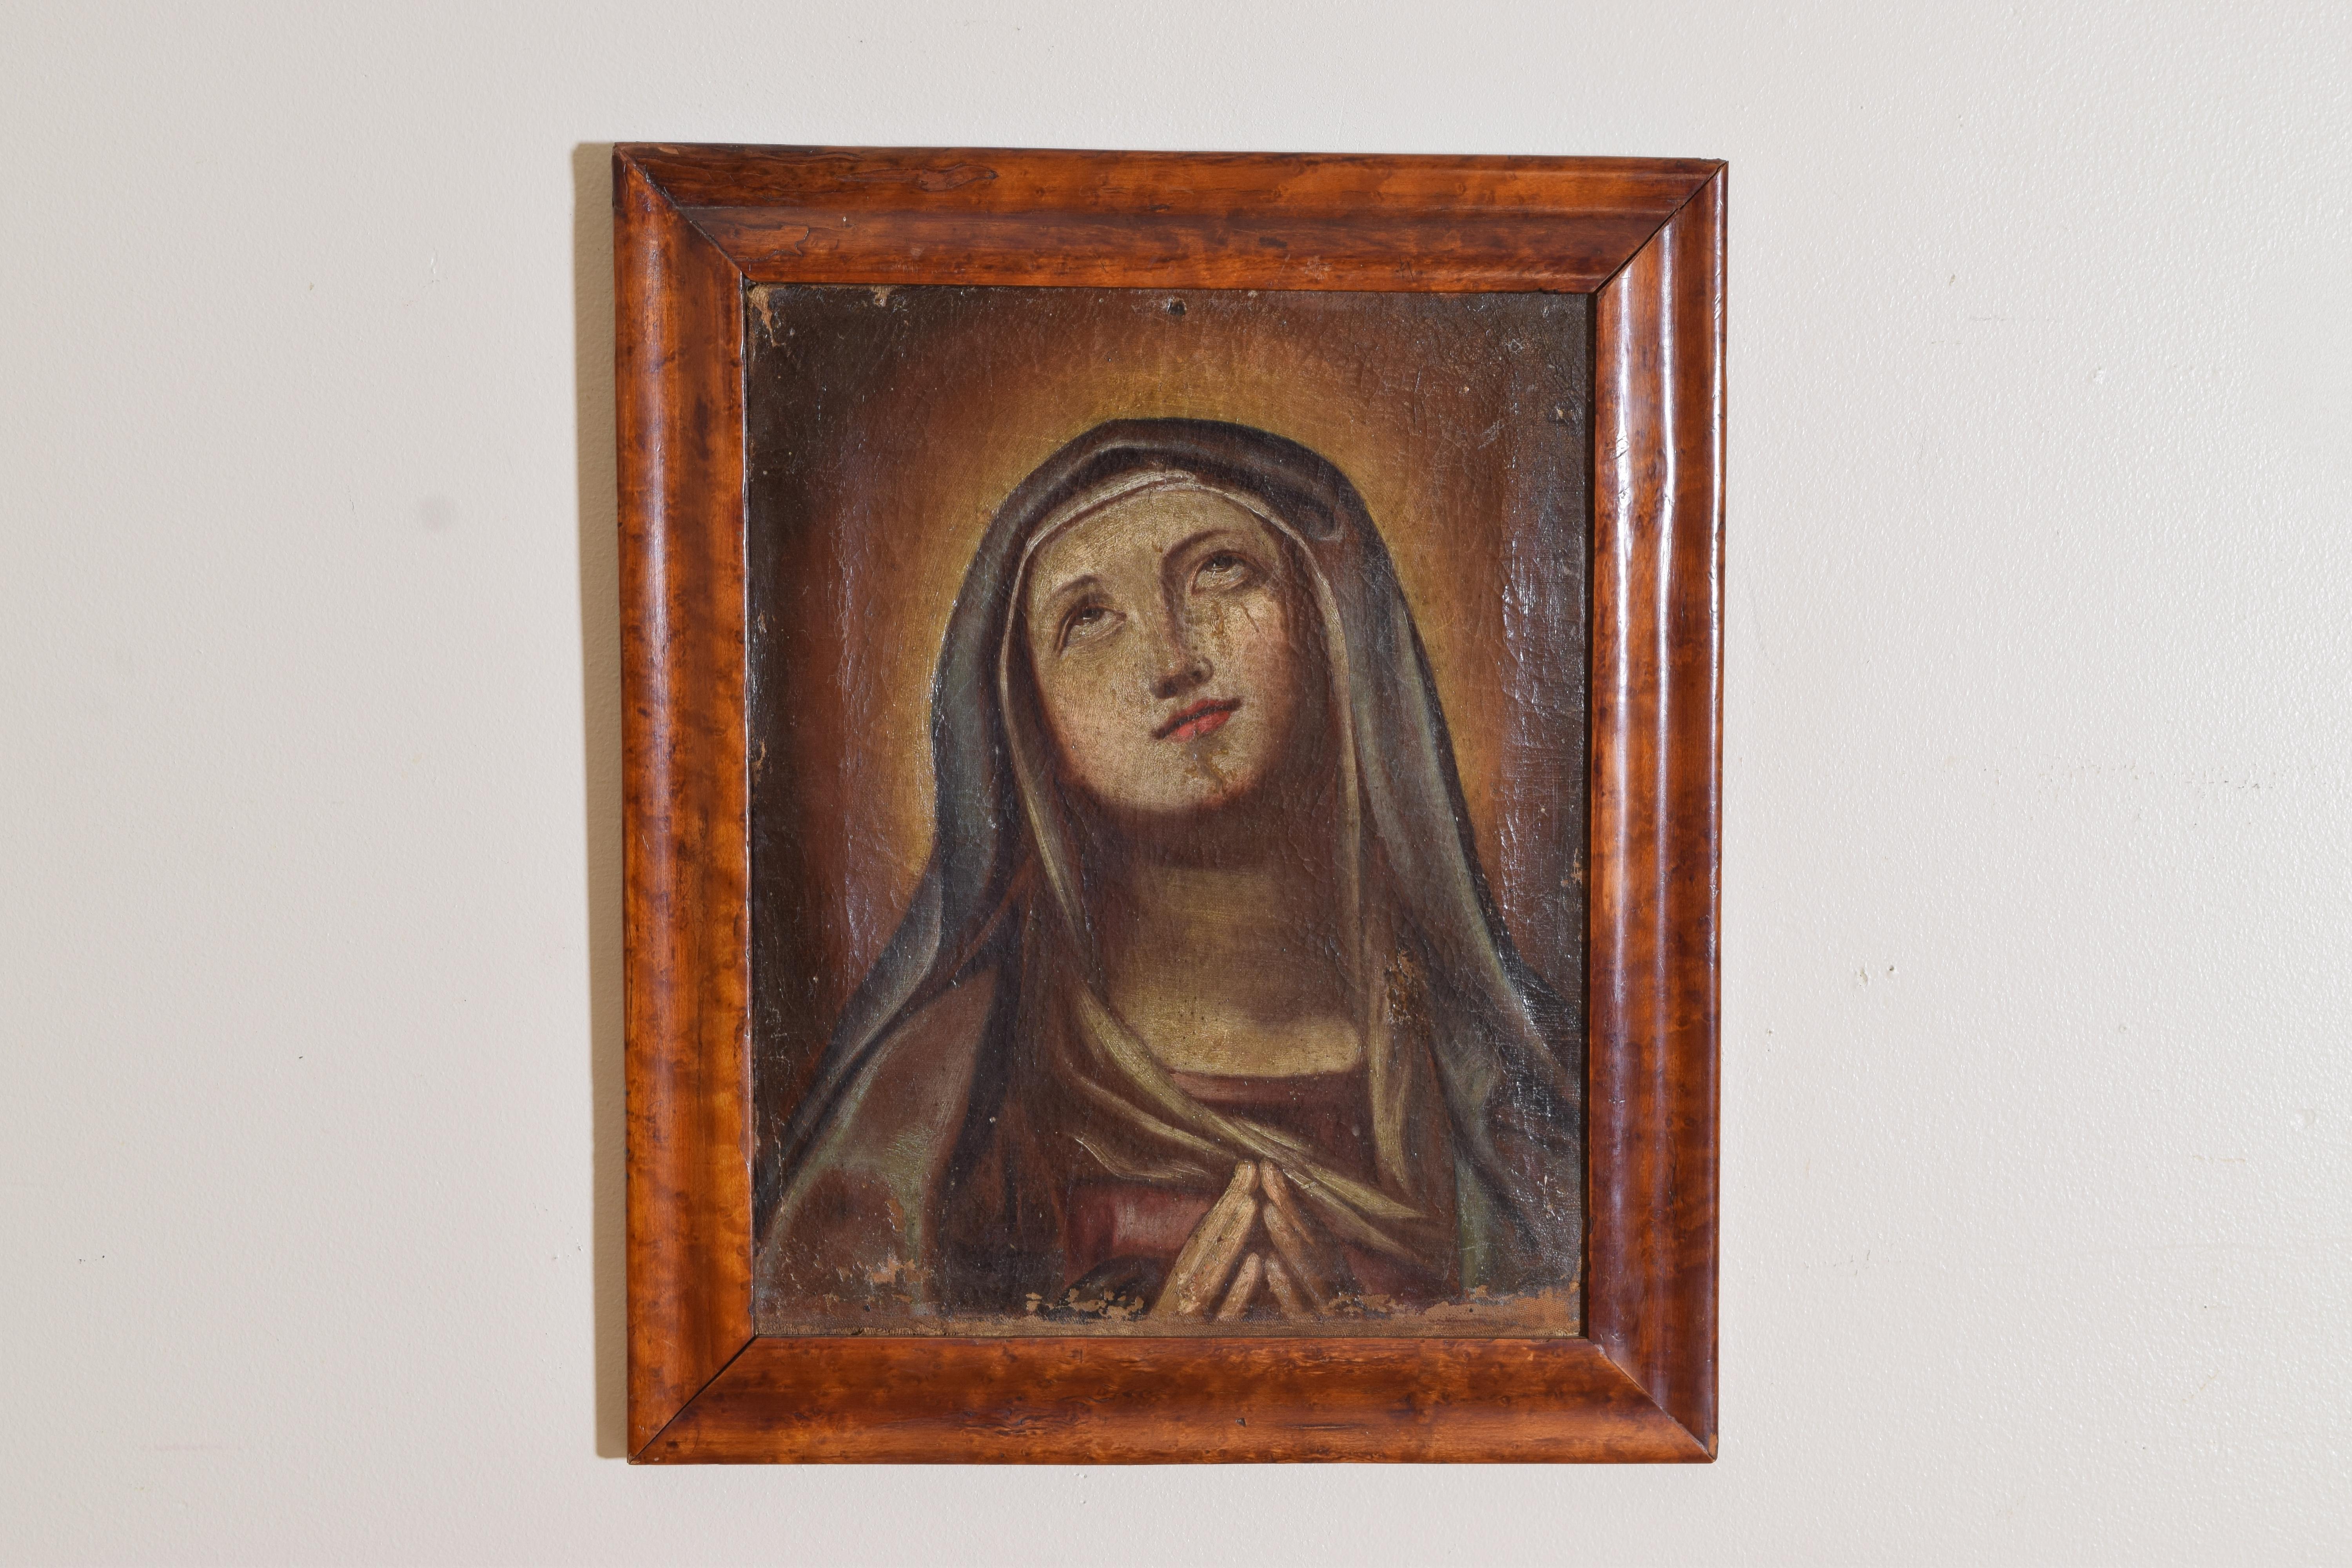 The painting depicting the Madonna draped in velvet garments in a state of adoration, the painting unrestored, in period and likely original walnut frame